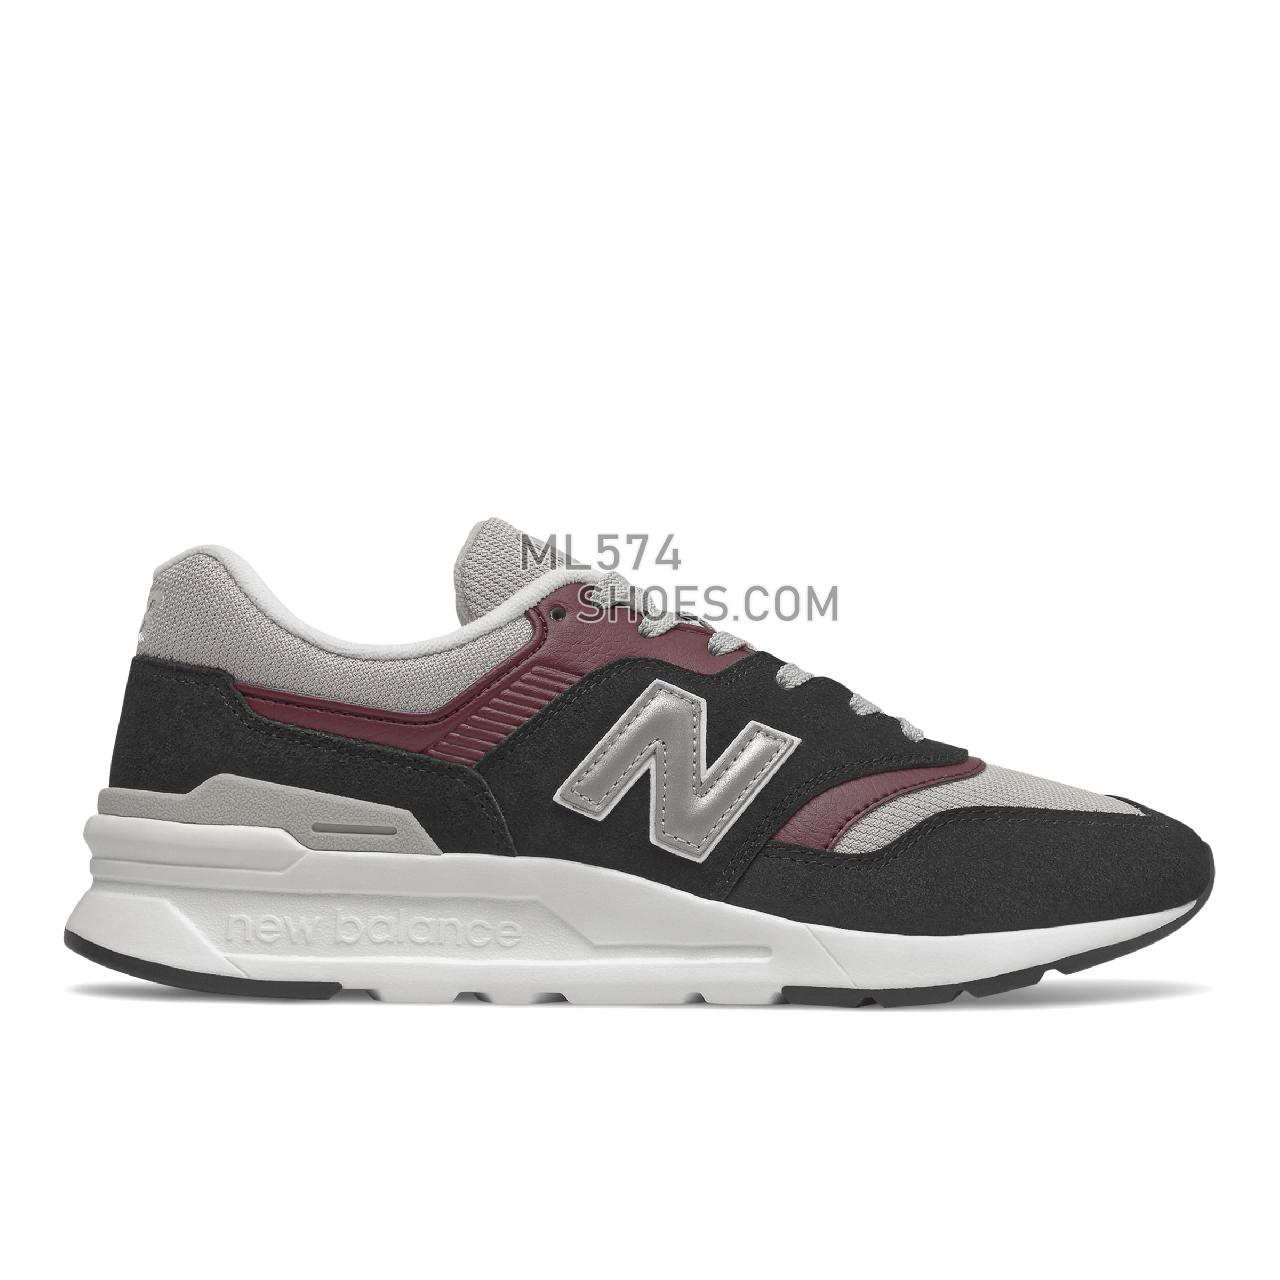 New Balance 997H - Men's Sport Style Sneakers - Black with White - CM997HTC